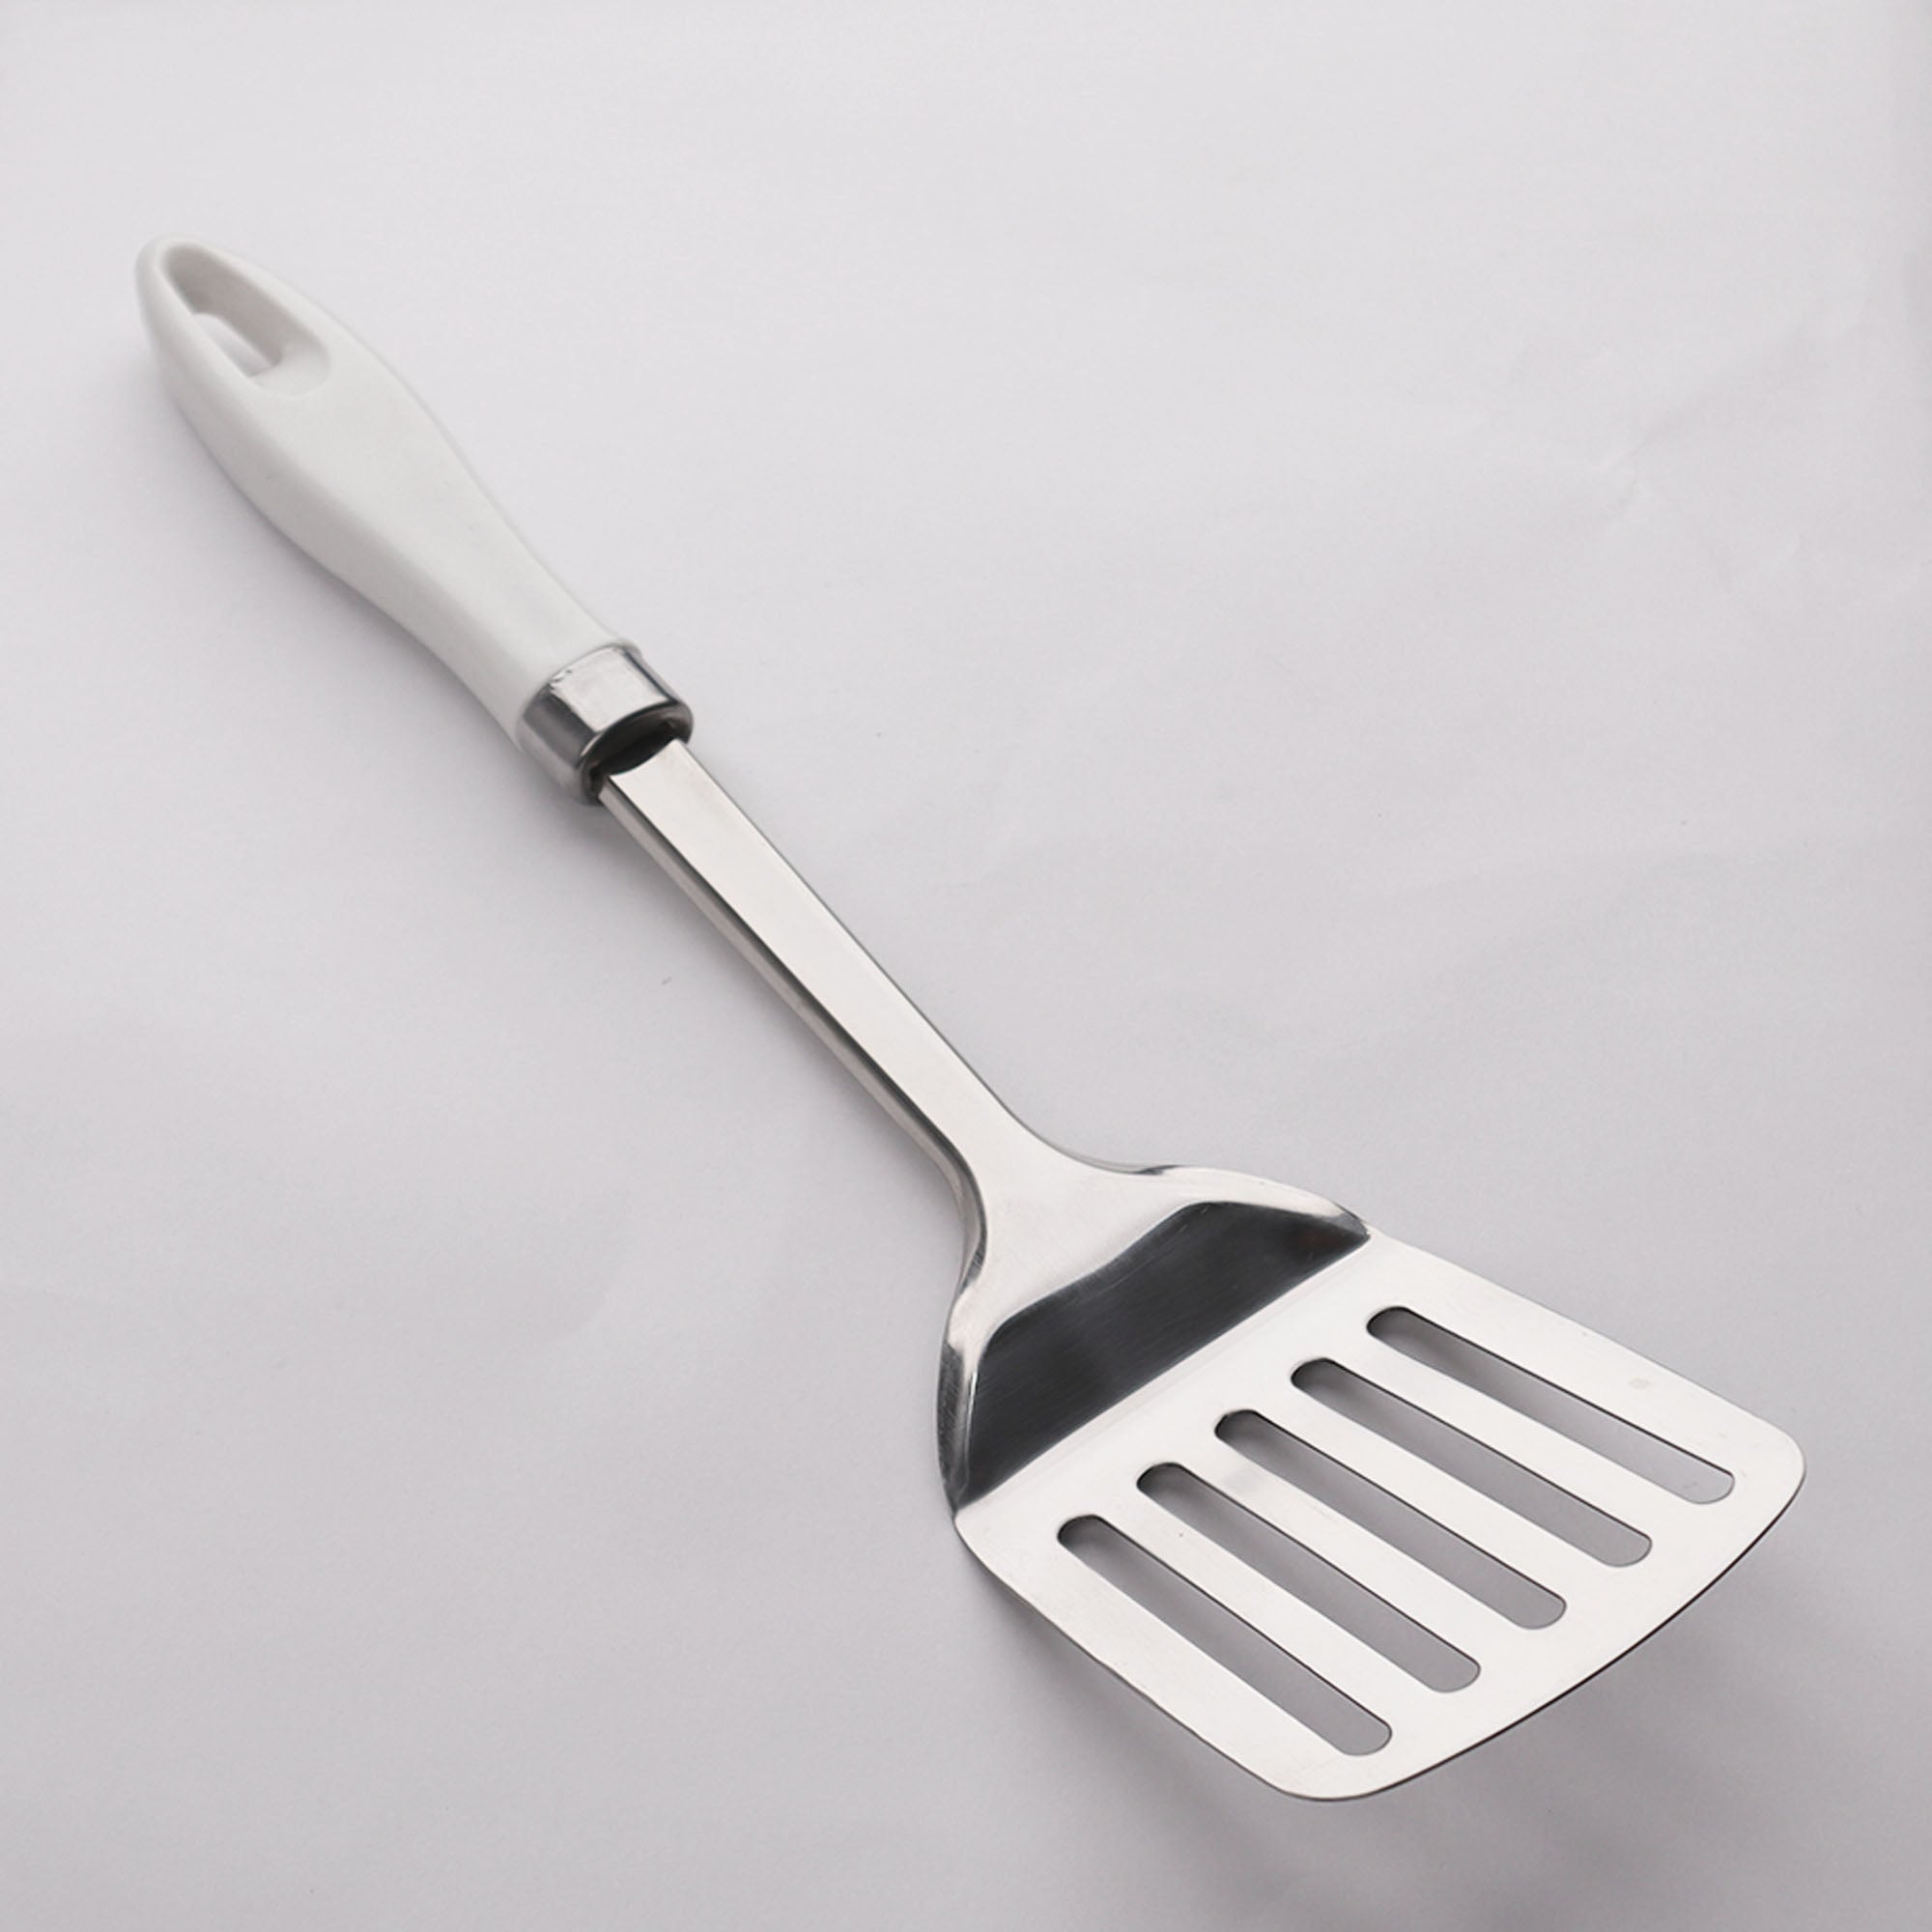 Chef Stainless Steel Rice Spoon - White Handle